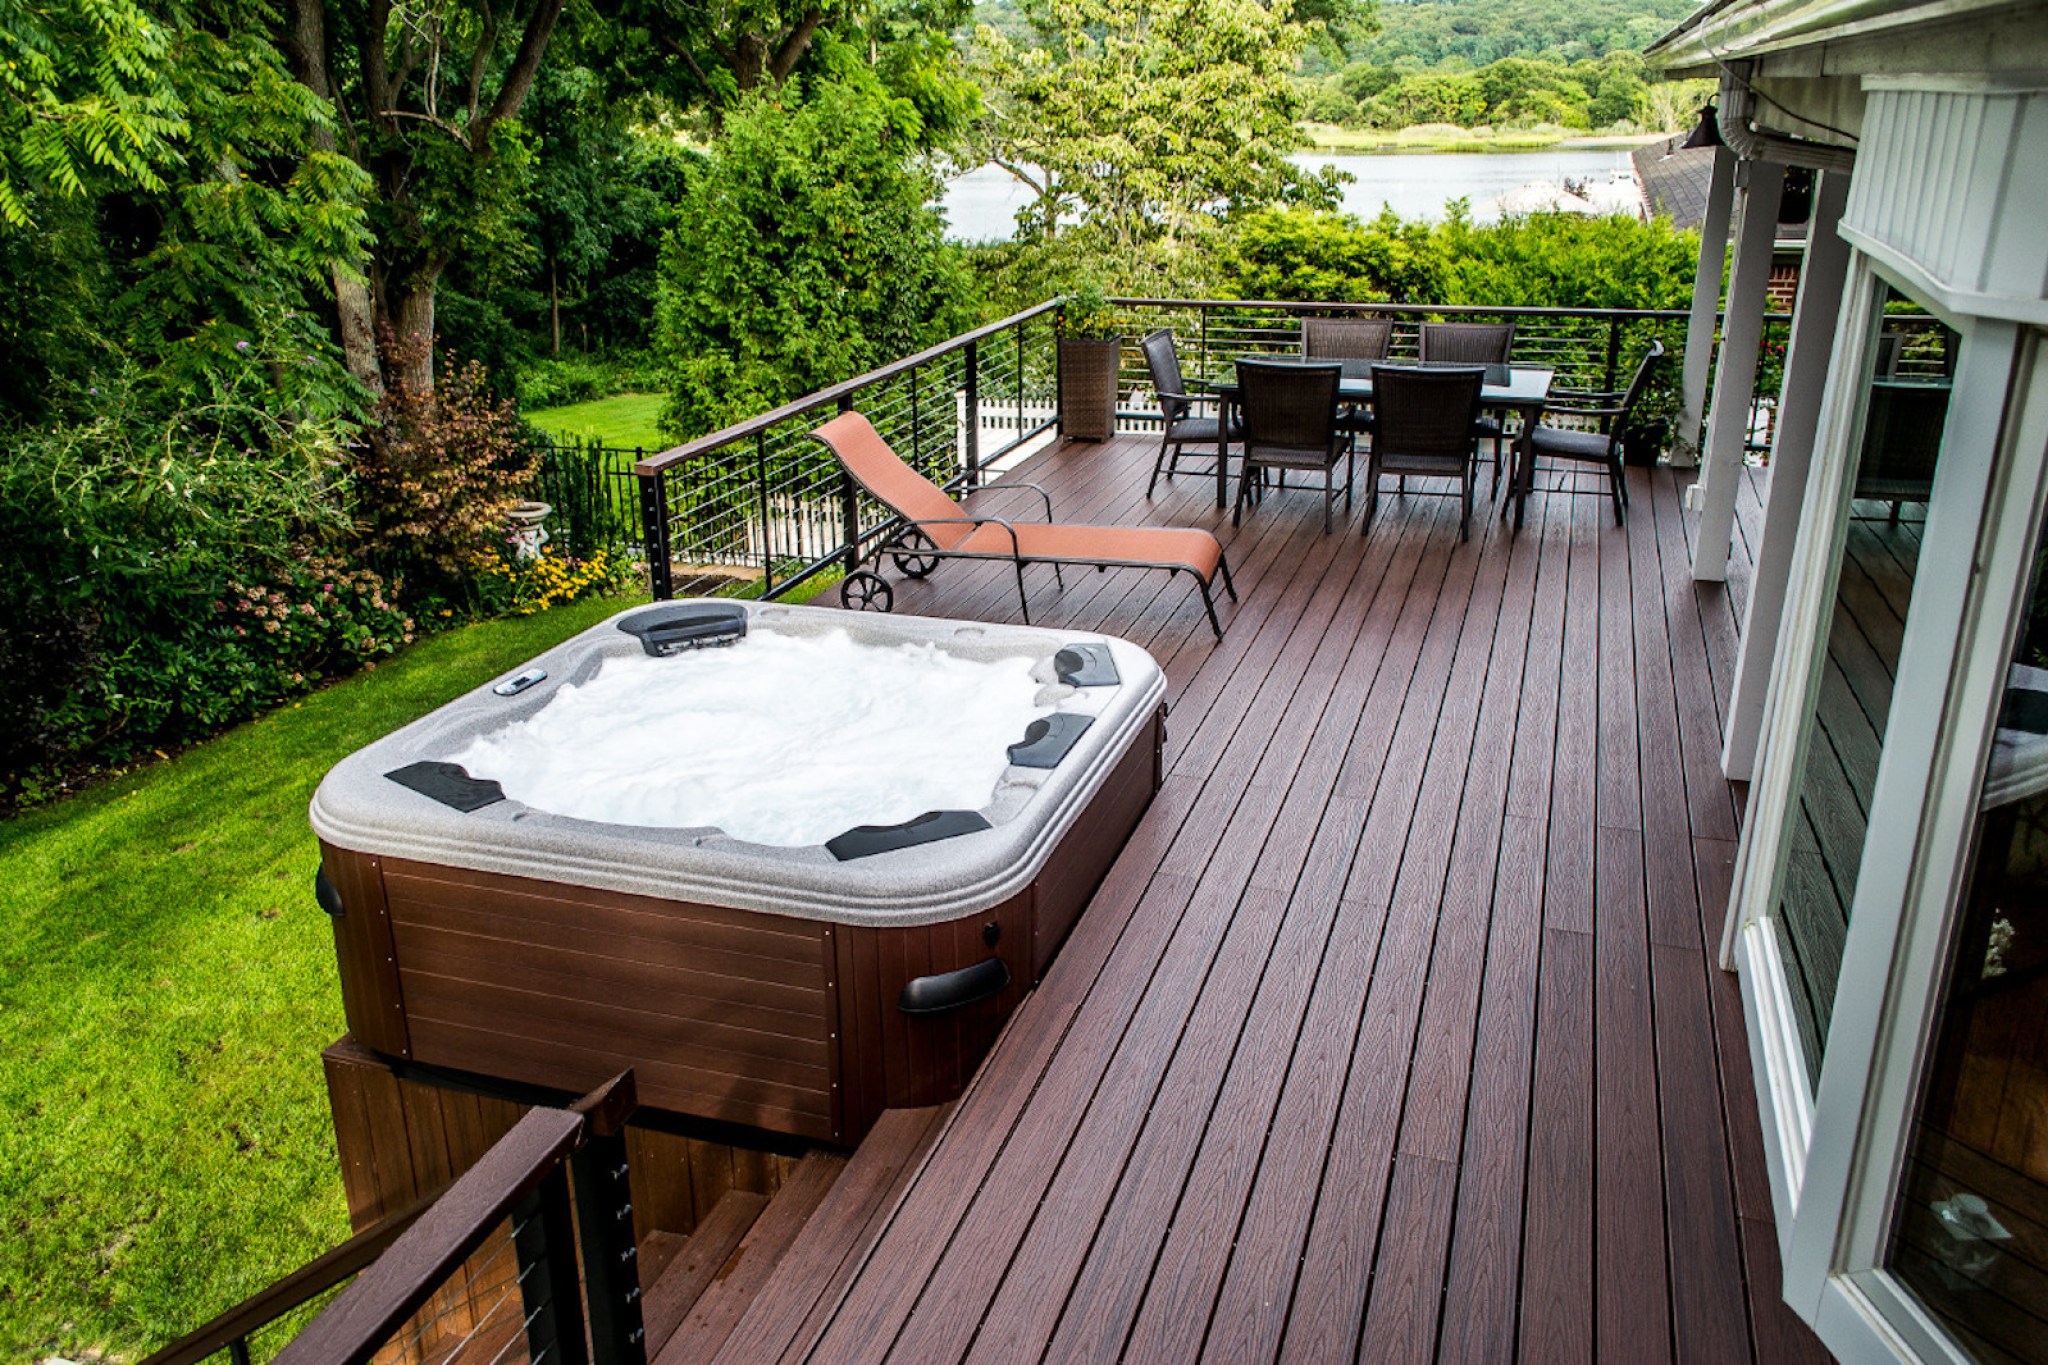 Outdoor jacuzzis designs. Affordable models